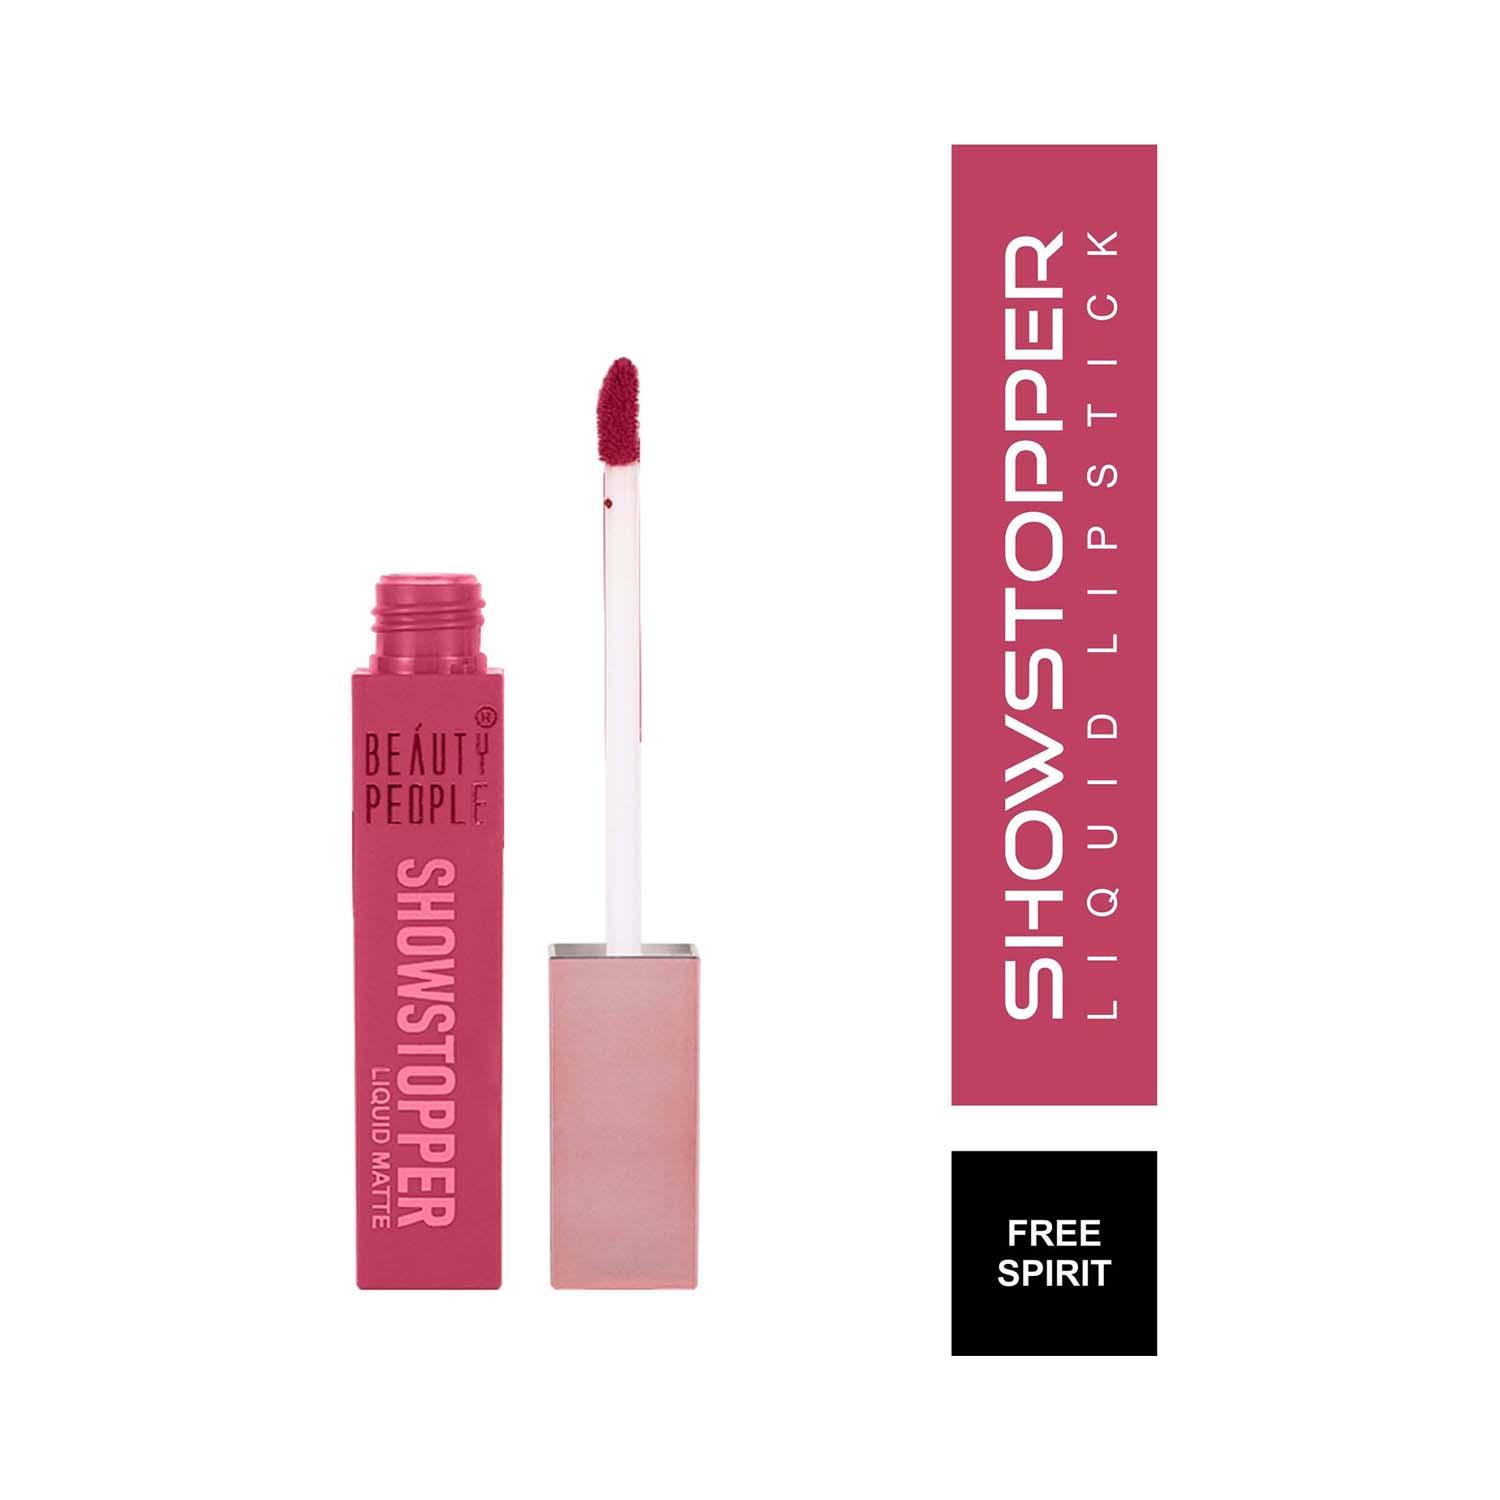 Beauty People | Beauty People Showstopper Liquid Lip Color with SPF 15 & Vitamin E - 03 Free Spirit (4ml)